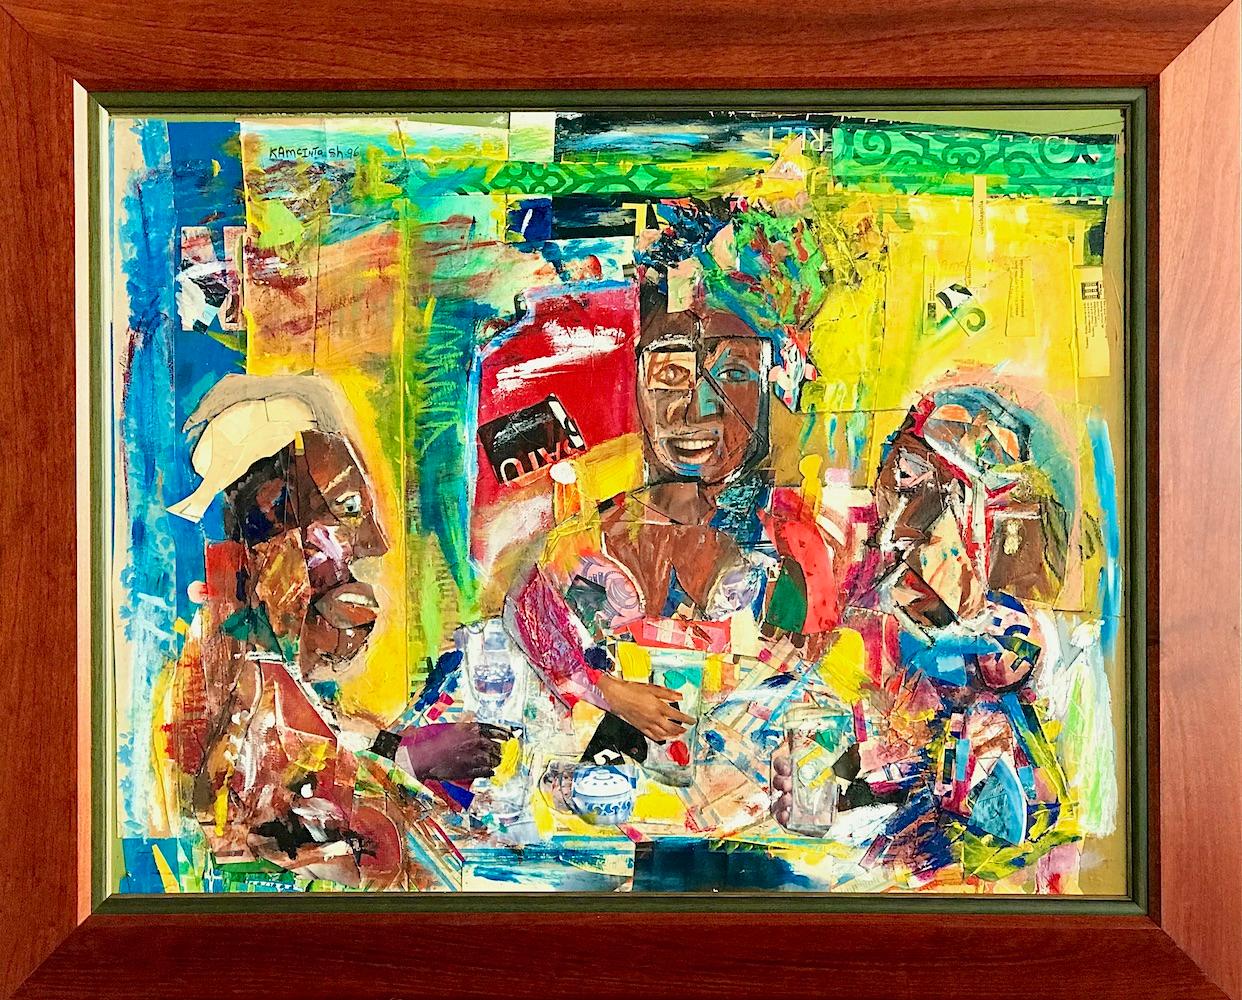 MORNING BREAKFAST Abstract Mixed Media Collage, Black People Having Breakfast - Mixed Media Art by Karl A. McIntosh